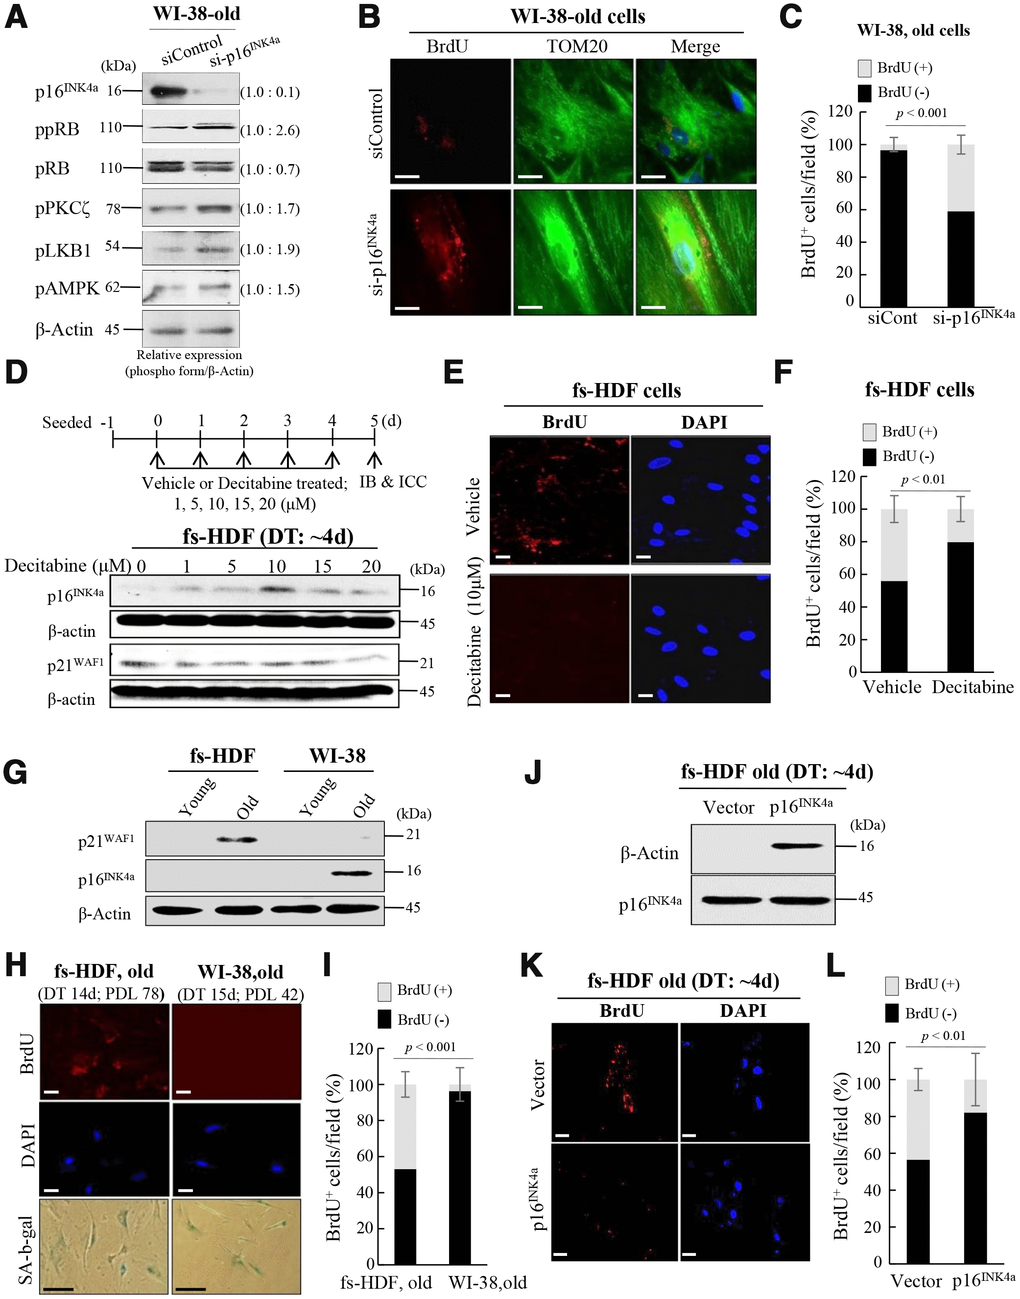 Silencing of p16INK4a or induction of p21WAF1 regulates mitochondrial remodeling in human fibroblasts. (A) Immunoblot analysis after knockdown of p16INK4a by transfection of old WI-38 cells with siRNA-p16INK4a. Note increase of pRB phosphorylation by knockdown of p16INK4a expression along with activation of the PKCζ-LKB1-AMPK signals. Band intensities were calculated by ImageJ software and normalized to that of β-Actin. (B) Knockdown of p16INK4a expression induced mitochondrial nucleoid formation in old WI-38 cells. Note anti-BrdU (red) and anti-Tom20 (green) expression in the siRNA-p16INK4a-transfected old WI-38 cells. Nuclei were stained with DAPI (blue). Scale bars, 10 μm. (C) Mitochondrial incorporation of BrdU was quantified. Confocal microscope images were captured and counted at least 120 cells using ImageJ software (n=6 images/group). (D) Induction of p16INK4a expression by repeated treatment of mid-old fs-HDF cells with decitabine (1–20 μM). The expression level of p16INK4a was higher after 5 days of 10 μM treatment, whereas that of p21WAF1 was constant. (E) Loss of mitochondrial nucleoid formation in fs-HDF mid-old cells treated with decitabine (10 μM) for 5 days. Scale bars, 20 μm. (F) Quantification of BrdU (+, -) mitochondria. Confocal microscope images were captured and counted at least 180 cells using ImageJ software (n = 8 images/group). (G) Significant induction of p21WAF1 expression in old fs-HDF cells, in contrast to p16INK4a expression in old WI-38 cells. (H) Comparison of old fs-HDF and old WI-38 cells. Note that 78 and 42 PDLs differed between the two cell types, respectively, despite the similar doubling times (DTs). Nucleoid remodeling was observed in the old fs-HDF cells, but not in the old WI-38 cells. Scale bars, 20 μm (white bar) or 100 μm (black bar). (I) Mitochondrial incorporation of BrdU was quantified. Confocal microscope images were captured and counted at least 180 cells using ImageJ software (n=9 images/group). (J) Mid-old fs-HDF cells were transfected with pCMV-p16INK4 and subjected to immunoblot analysis. (K) Loss of mitochondrial nucleoid formation in mid-old fs-HDF cells after forced expression of p16INK4 gene for 6 days. Scale bars, 20 μm. (L) Mitochondrial incorporation of BrdU was quantified. Confocal microscope images were captured and counted at least 150 cells using ImageJ software (n=7 images/group).